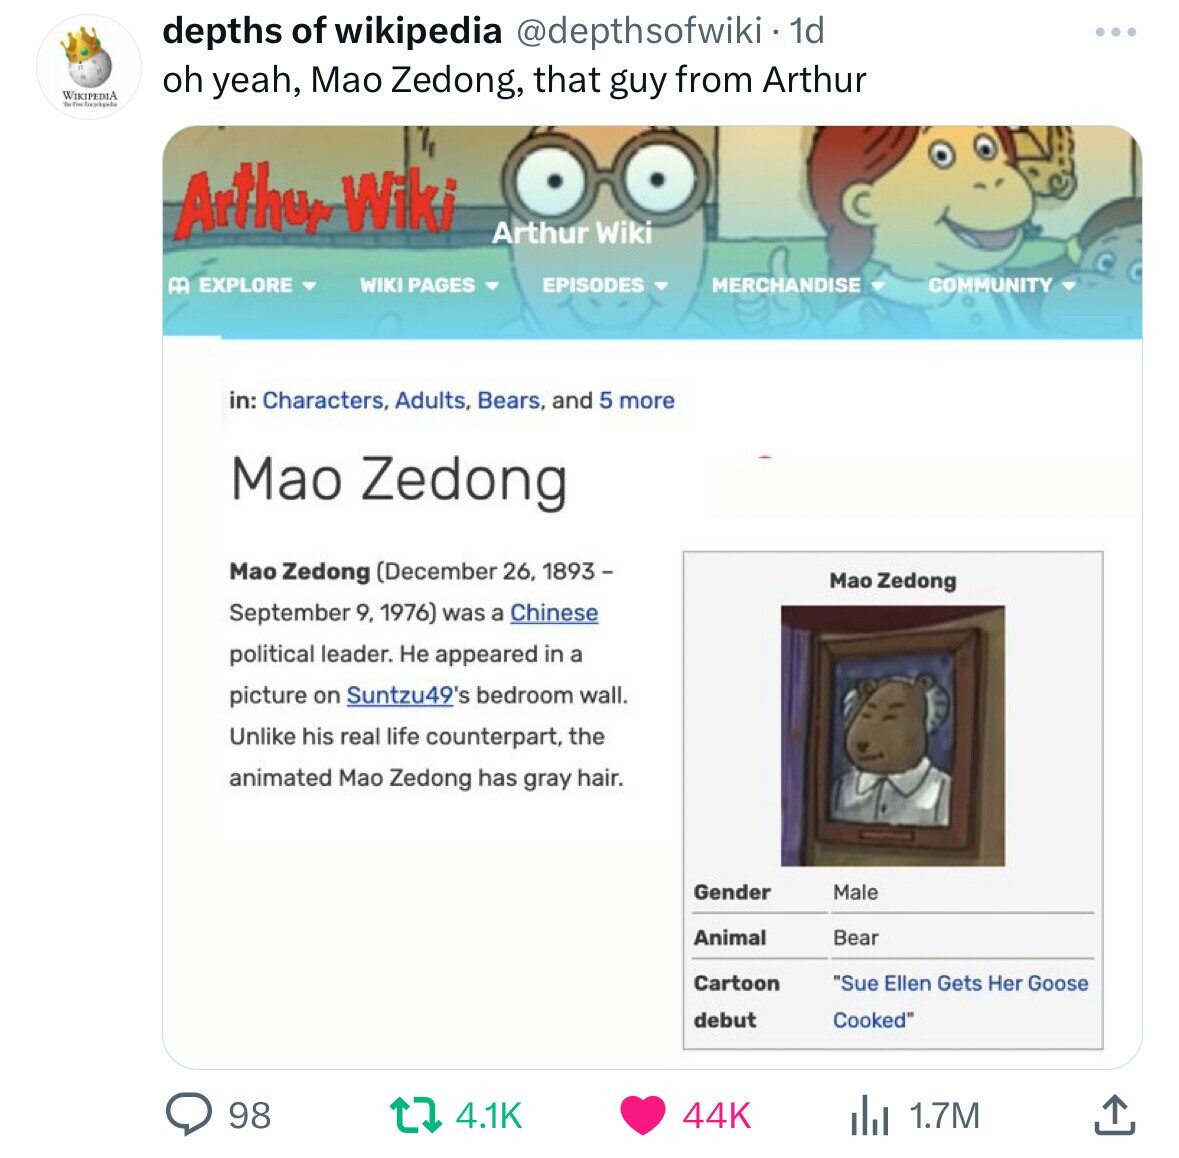 web page - Wikipedia The frygela depths of wikipedia . 1d oh yeah, Mao Zedong, that guy from Arthur Arther Wit wik Arthur Wiki A Explore Y Wiki Pages Episodesy in Characters, Adults, Bears, and 5 more Mao Zedong Mao Zedong was a Chinese political leader. 